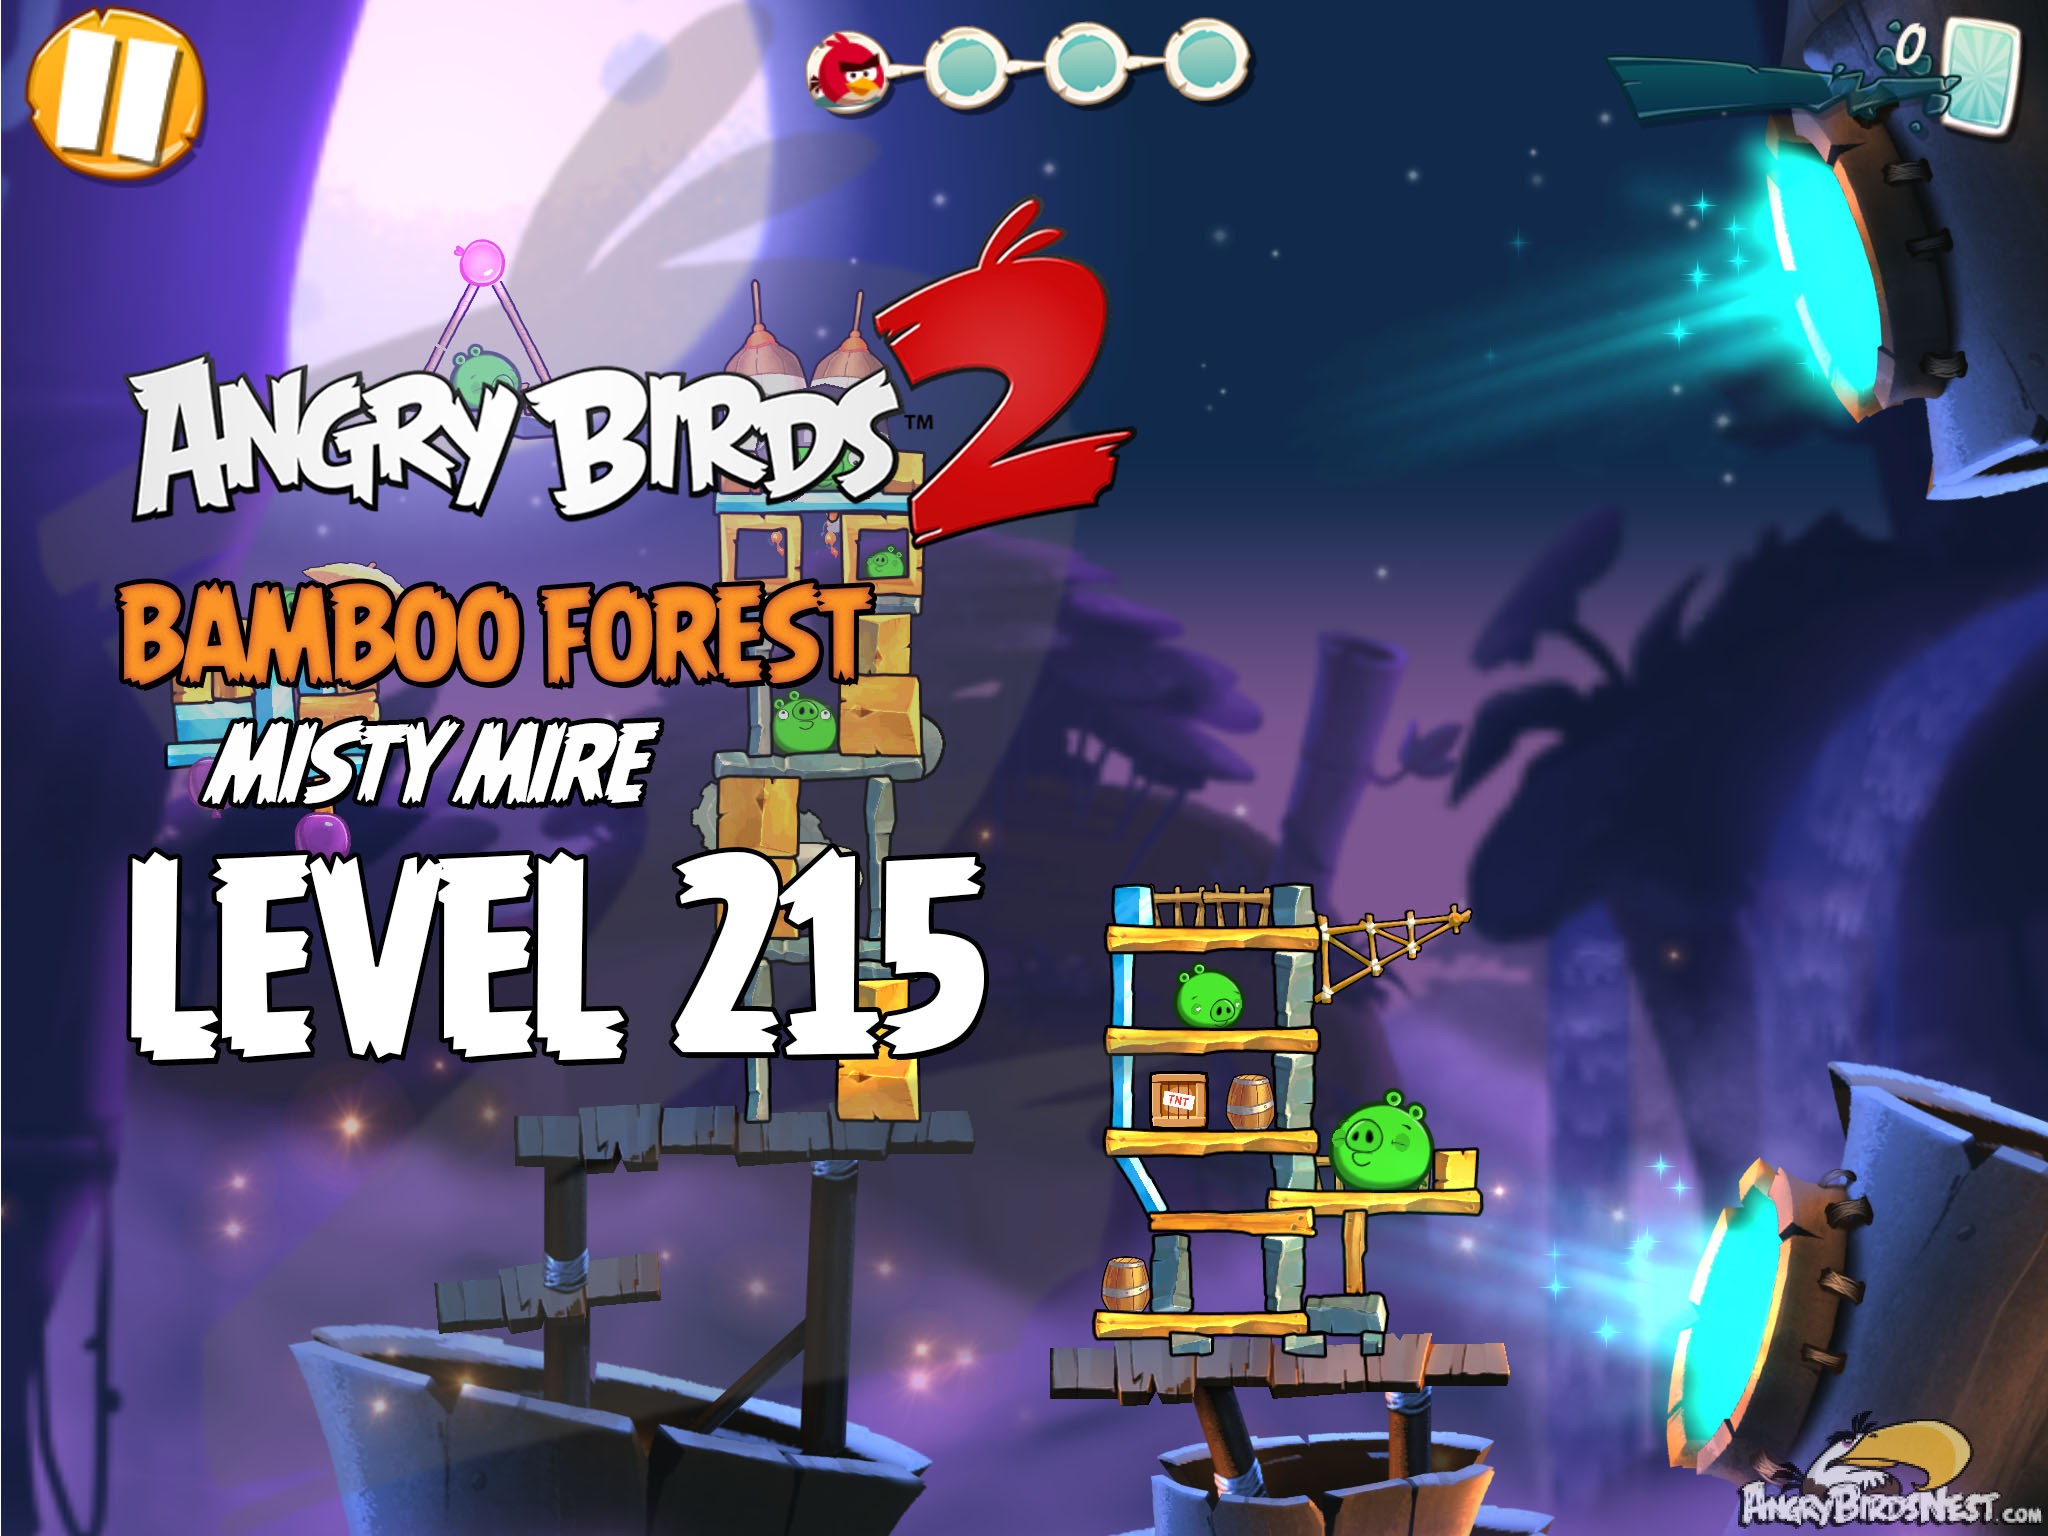 Angry Birds 2 Bamboo Forest Misty Mire Level 215